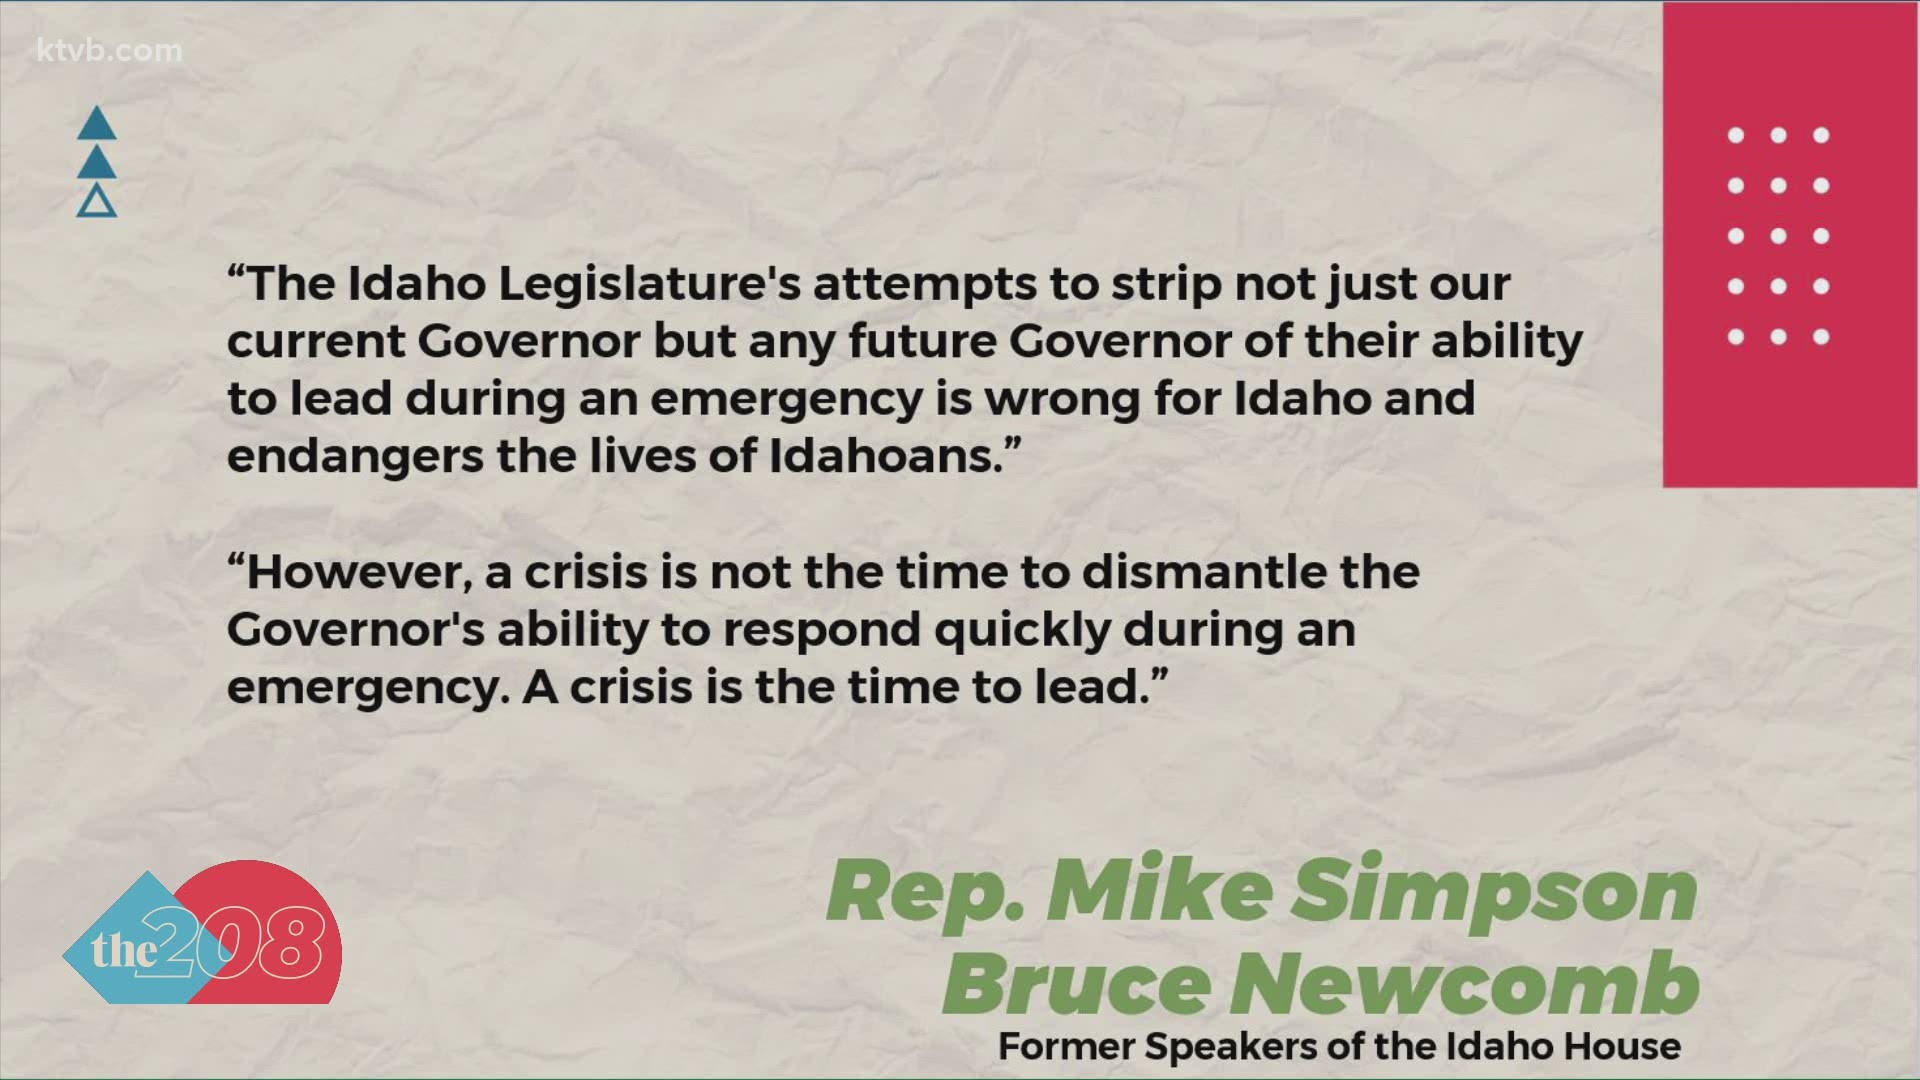 The two former speakers of the Idaho House urged lawmakers to reconsider legislation to limit the governor's authority during time of emergencies.